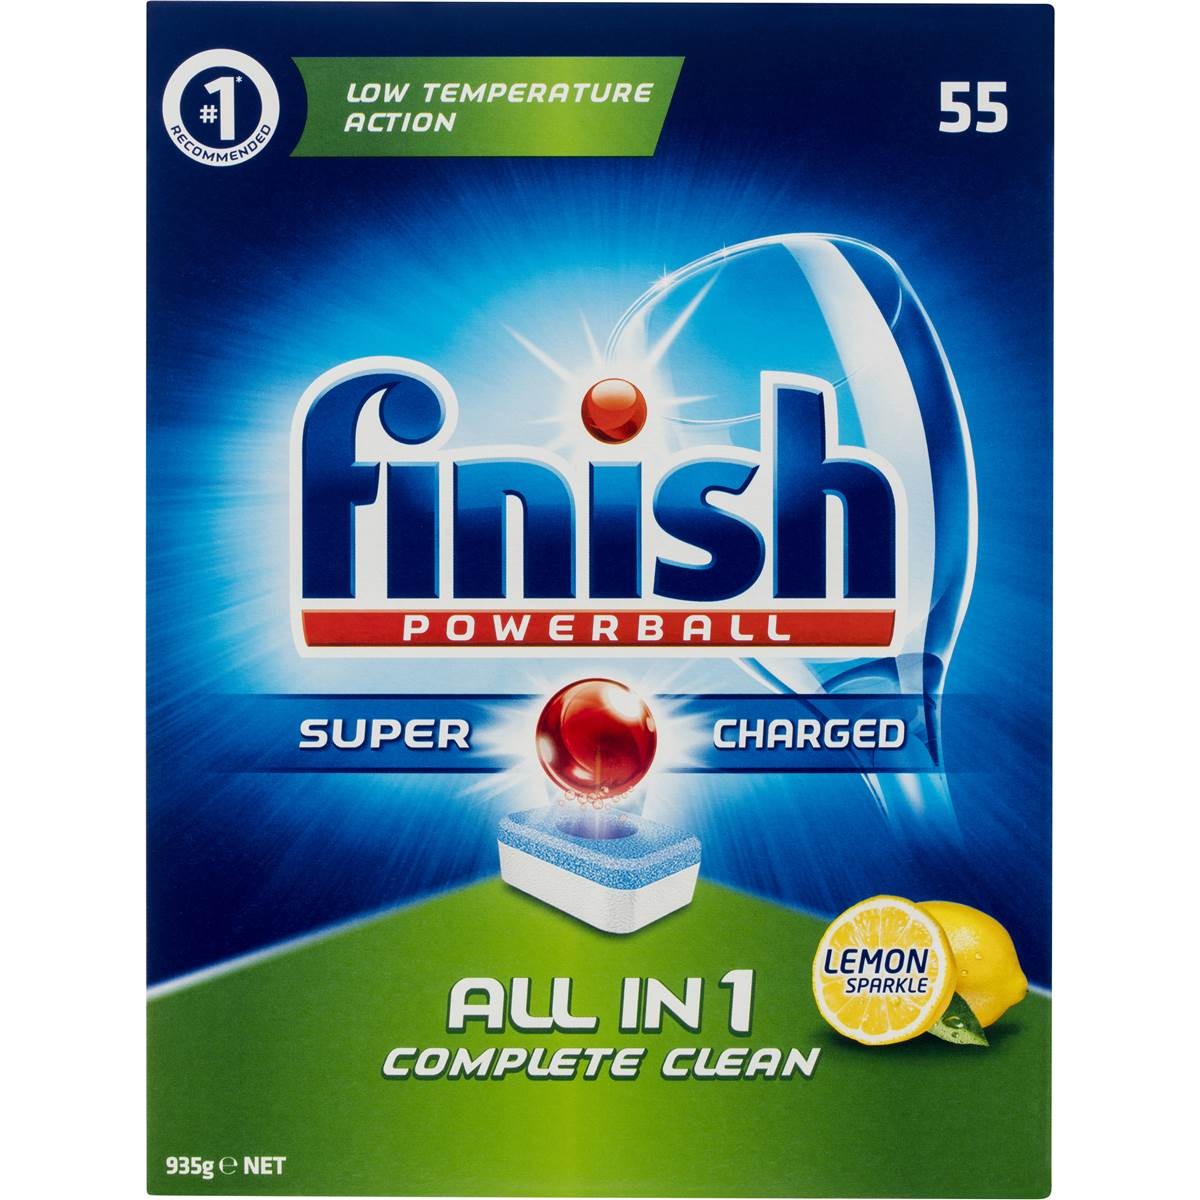 FINISH POWERBALL ALL-IN-1 DISHWASHING TABLETS LEMON BOX 55  (price excludes gst)